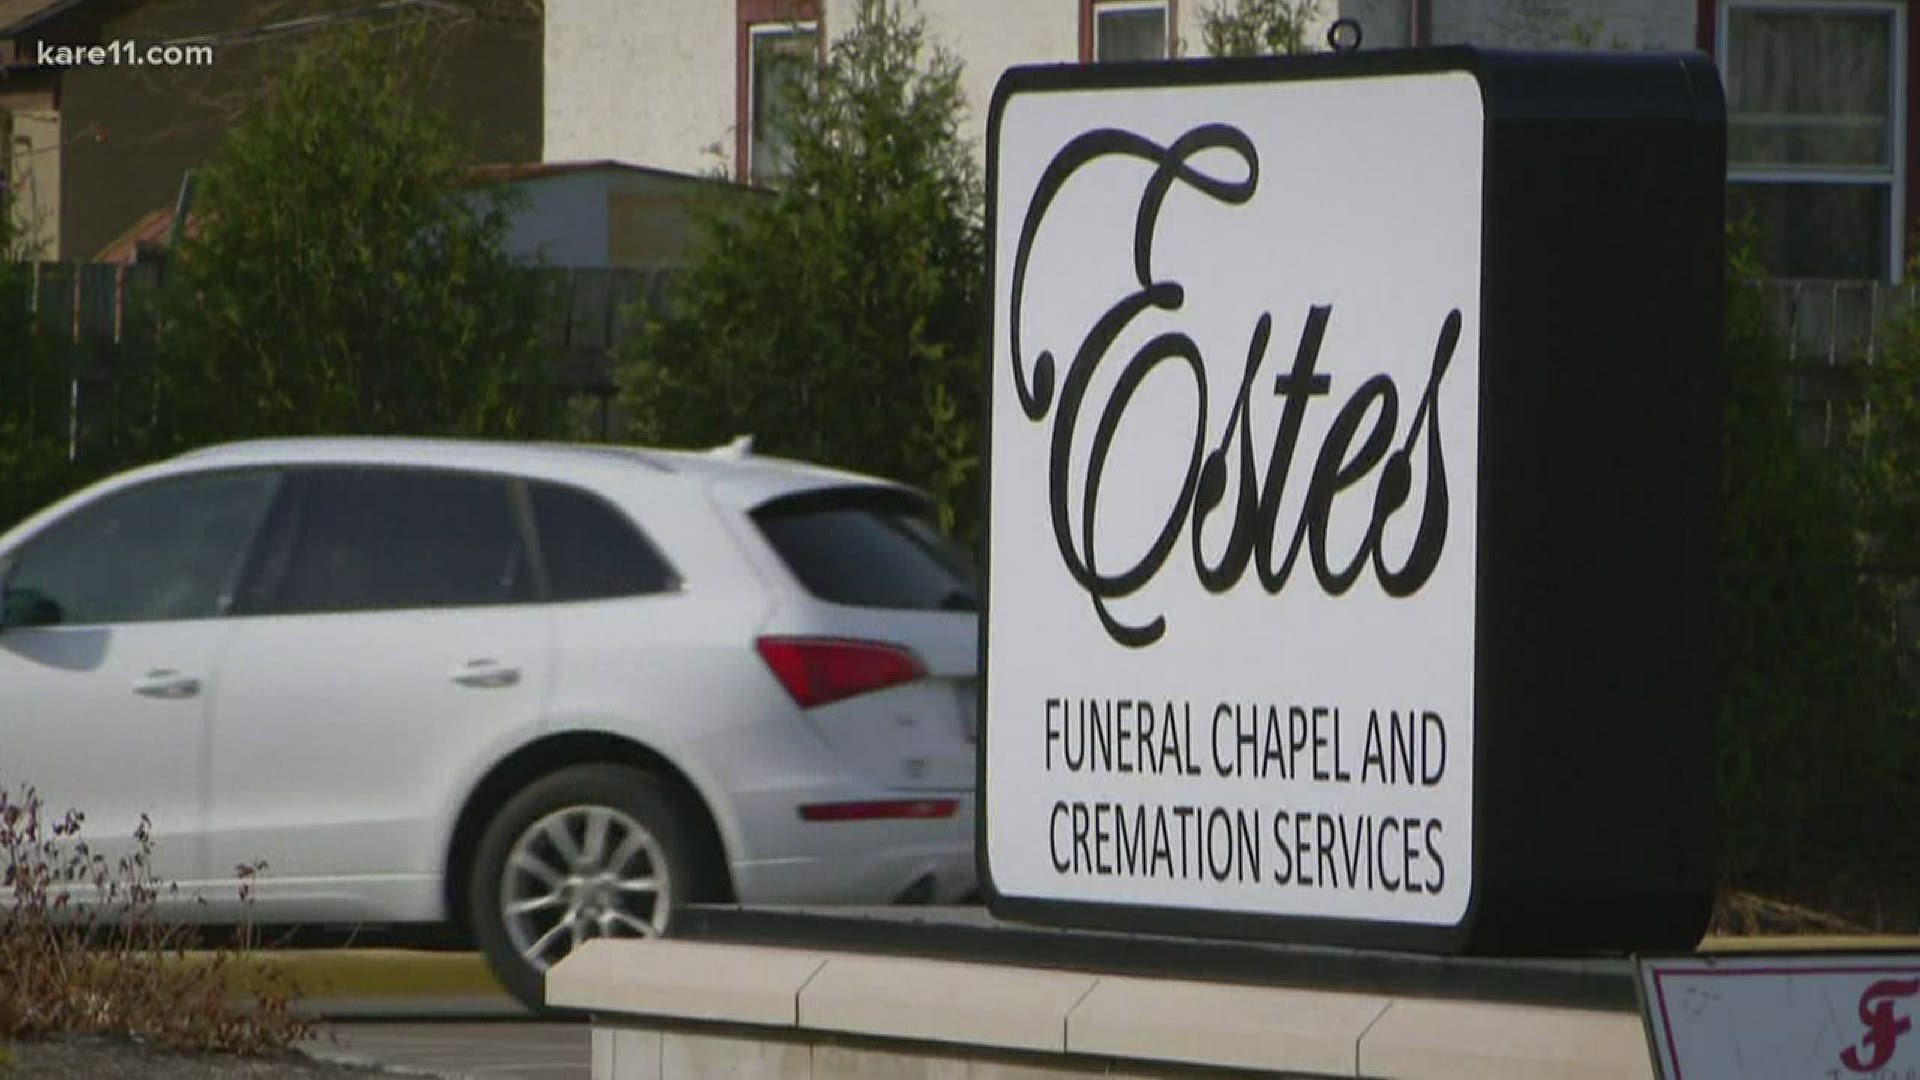 Estes Funeral Chapel in Minneapolis has been approved for services with ten people or less. Families can stream funerals online.